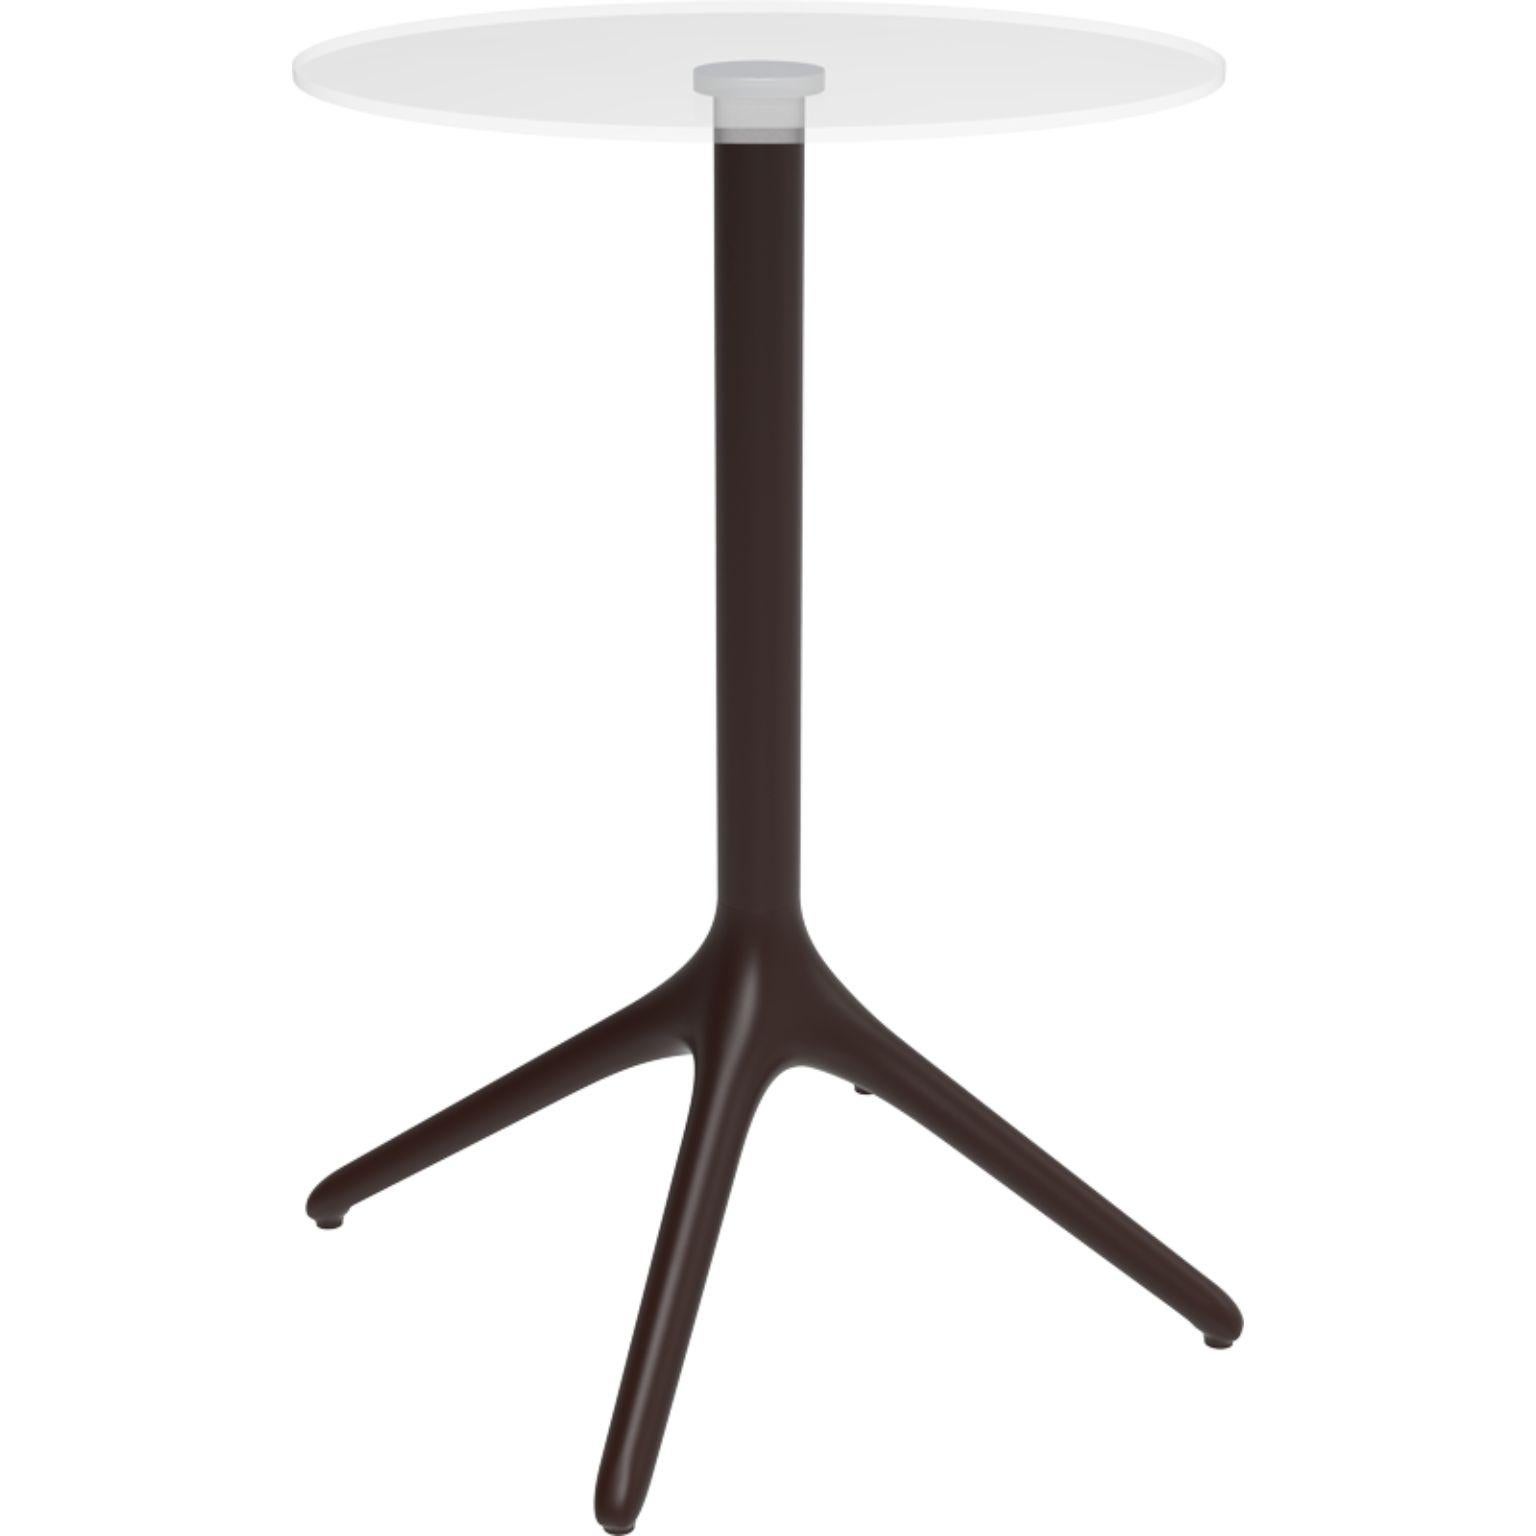 Uni chocolate table XL 105 by MOWEE
Dimensions: D 50 x H 105 cm
Material: Aluminium, tempered glass
Weight: 9.7 kg
Also available in different colours and finishes.

A table designed to be as versatile as possible and can coexist with a